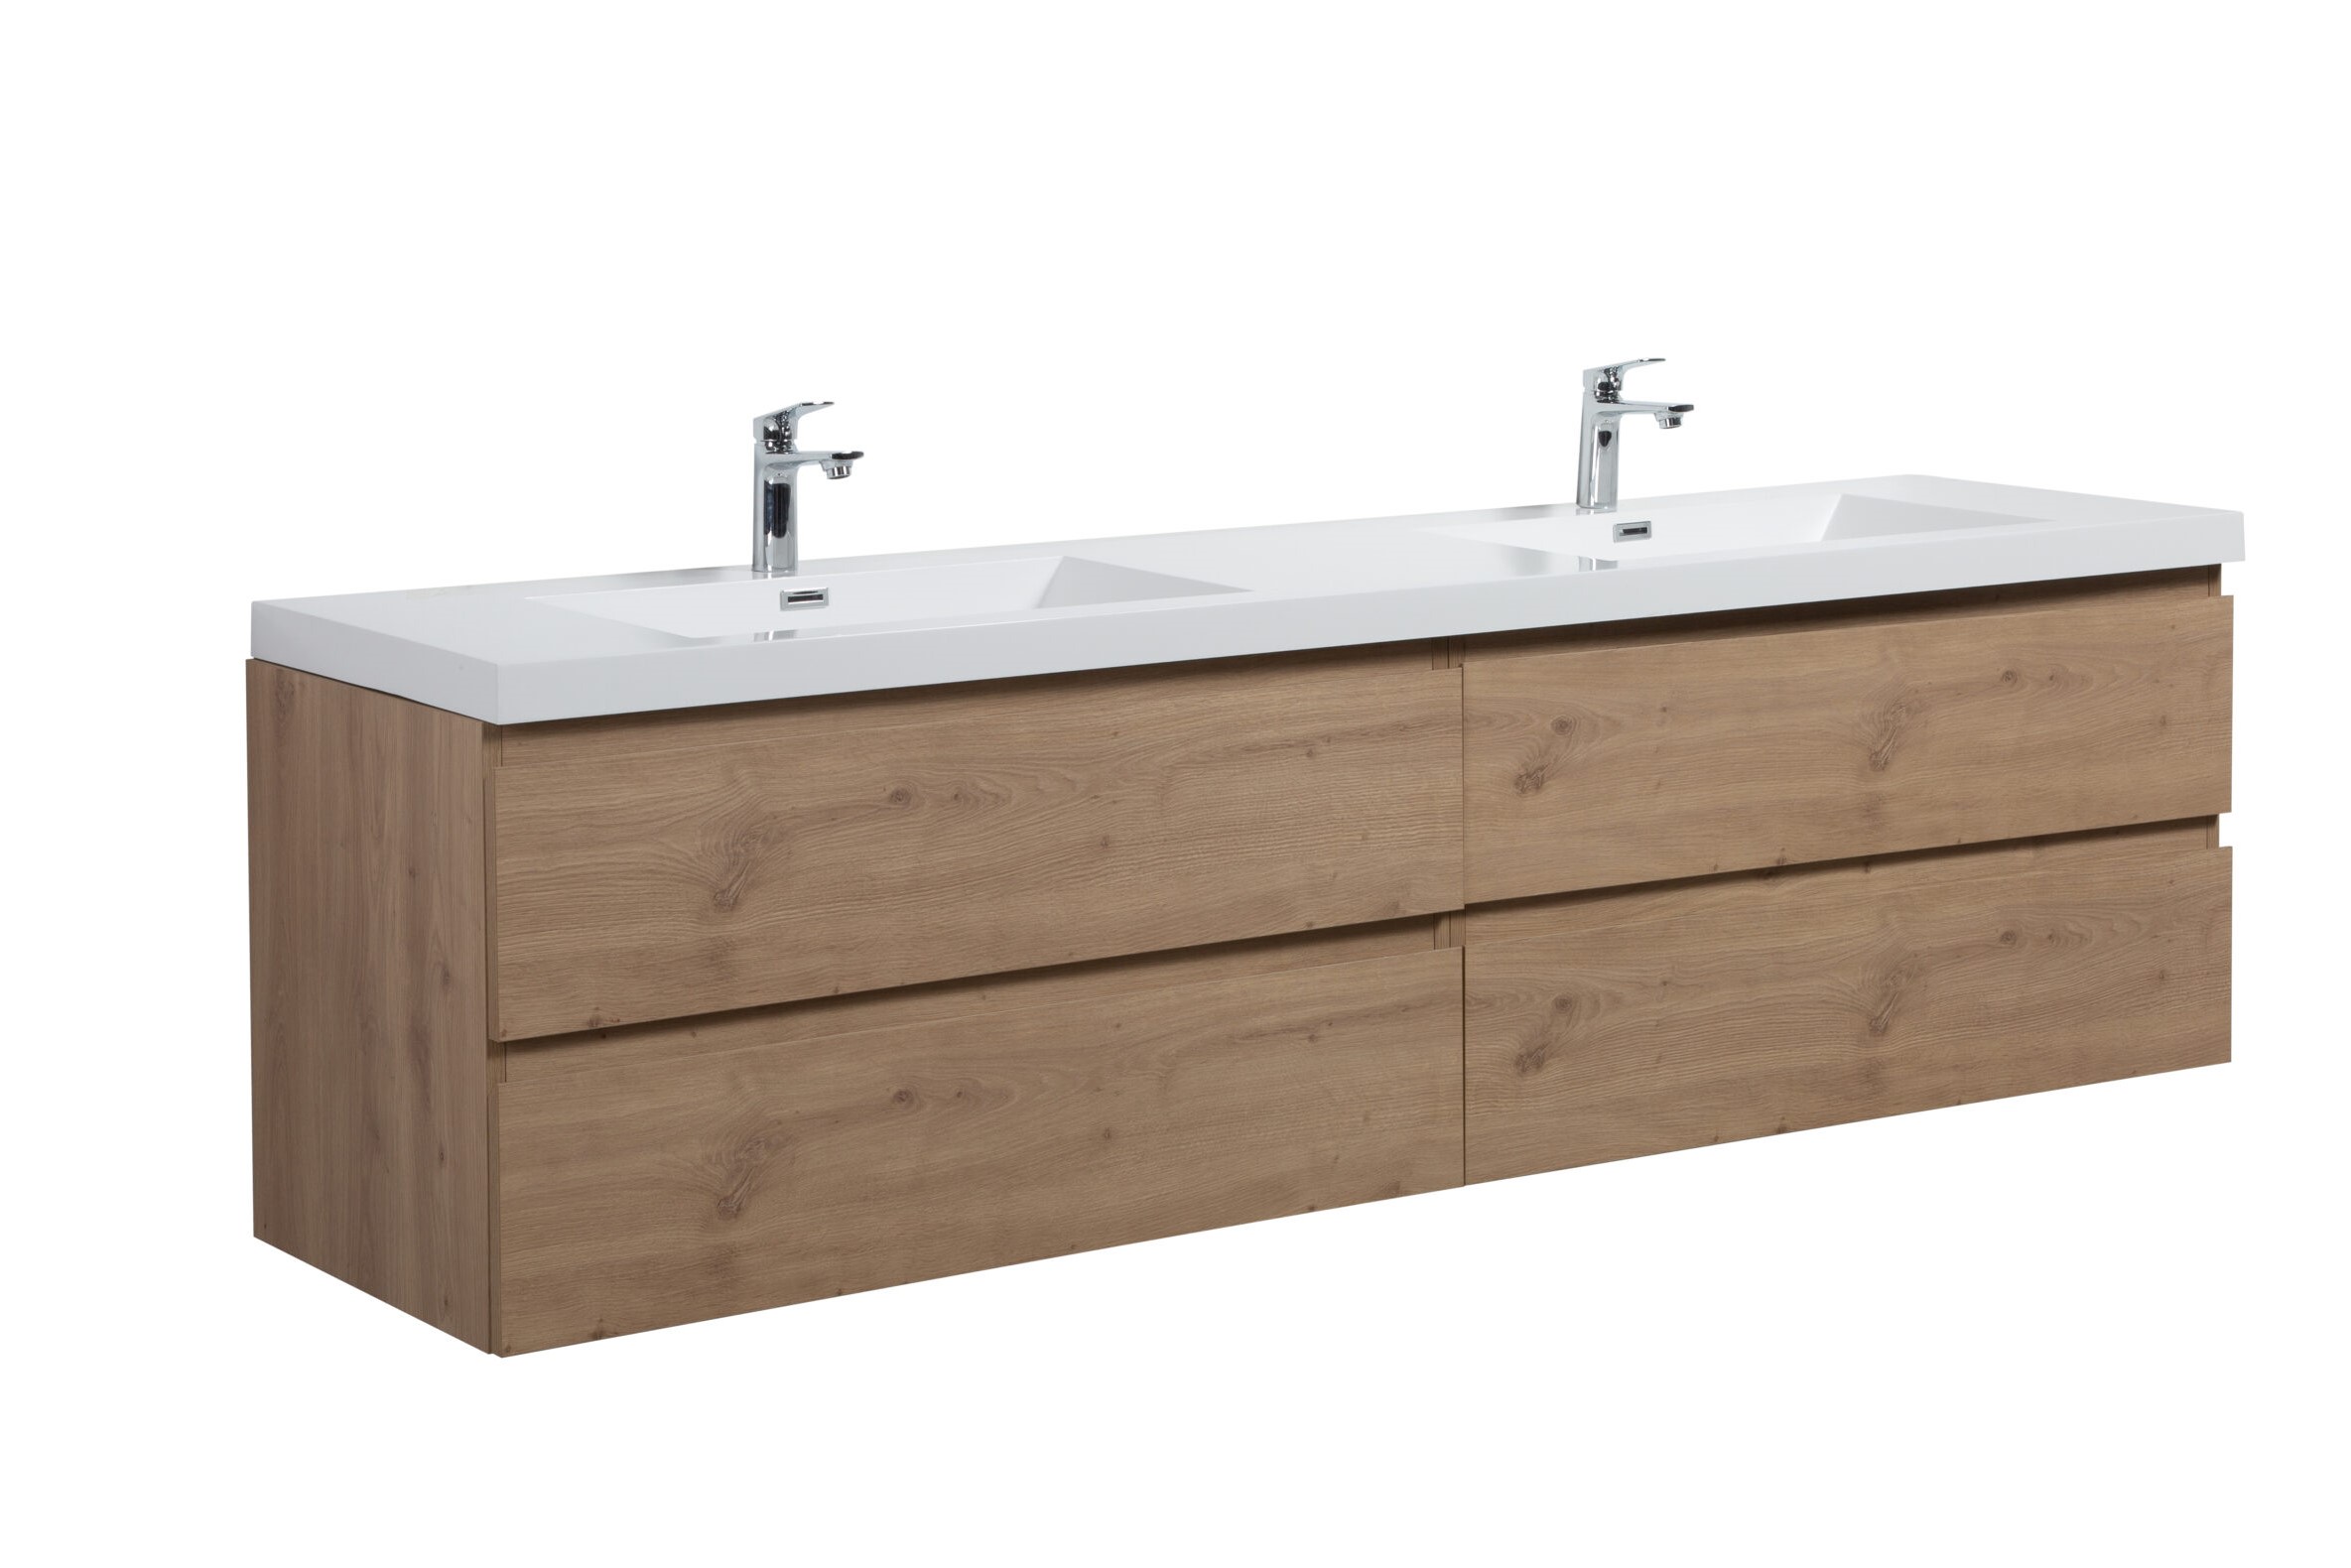 Aurora 84" Sonoma Oak Wall Hung Double Sink Bathroom Vanity with White Acrylic Countertop